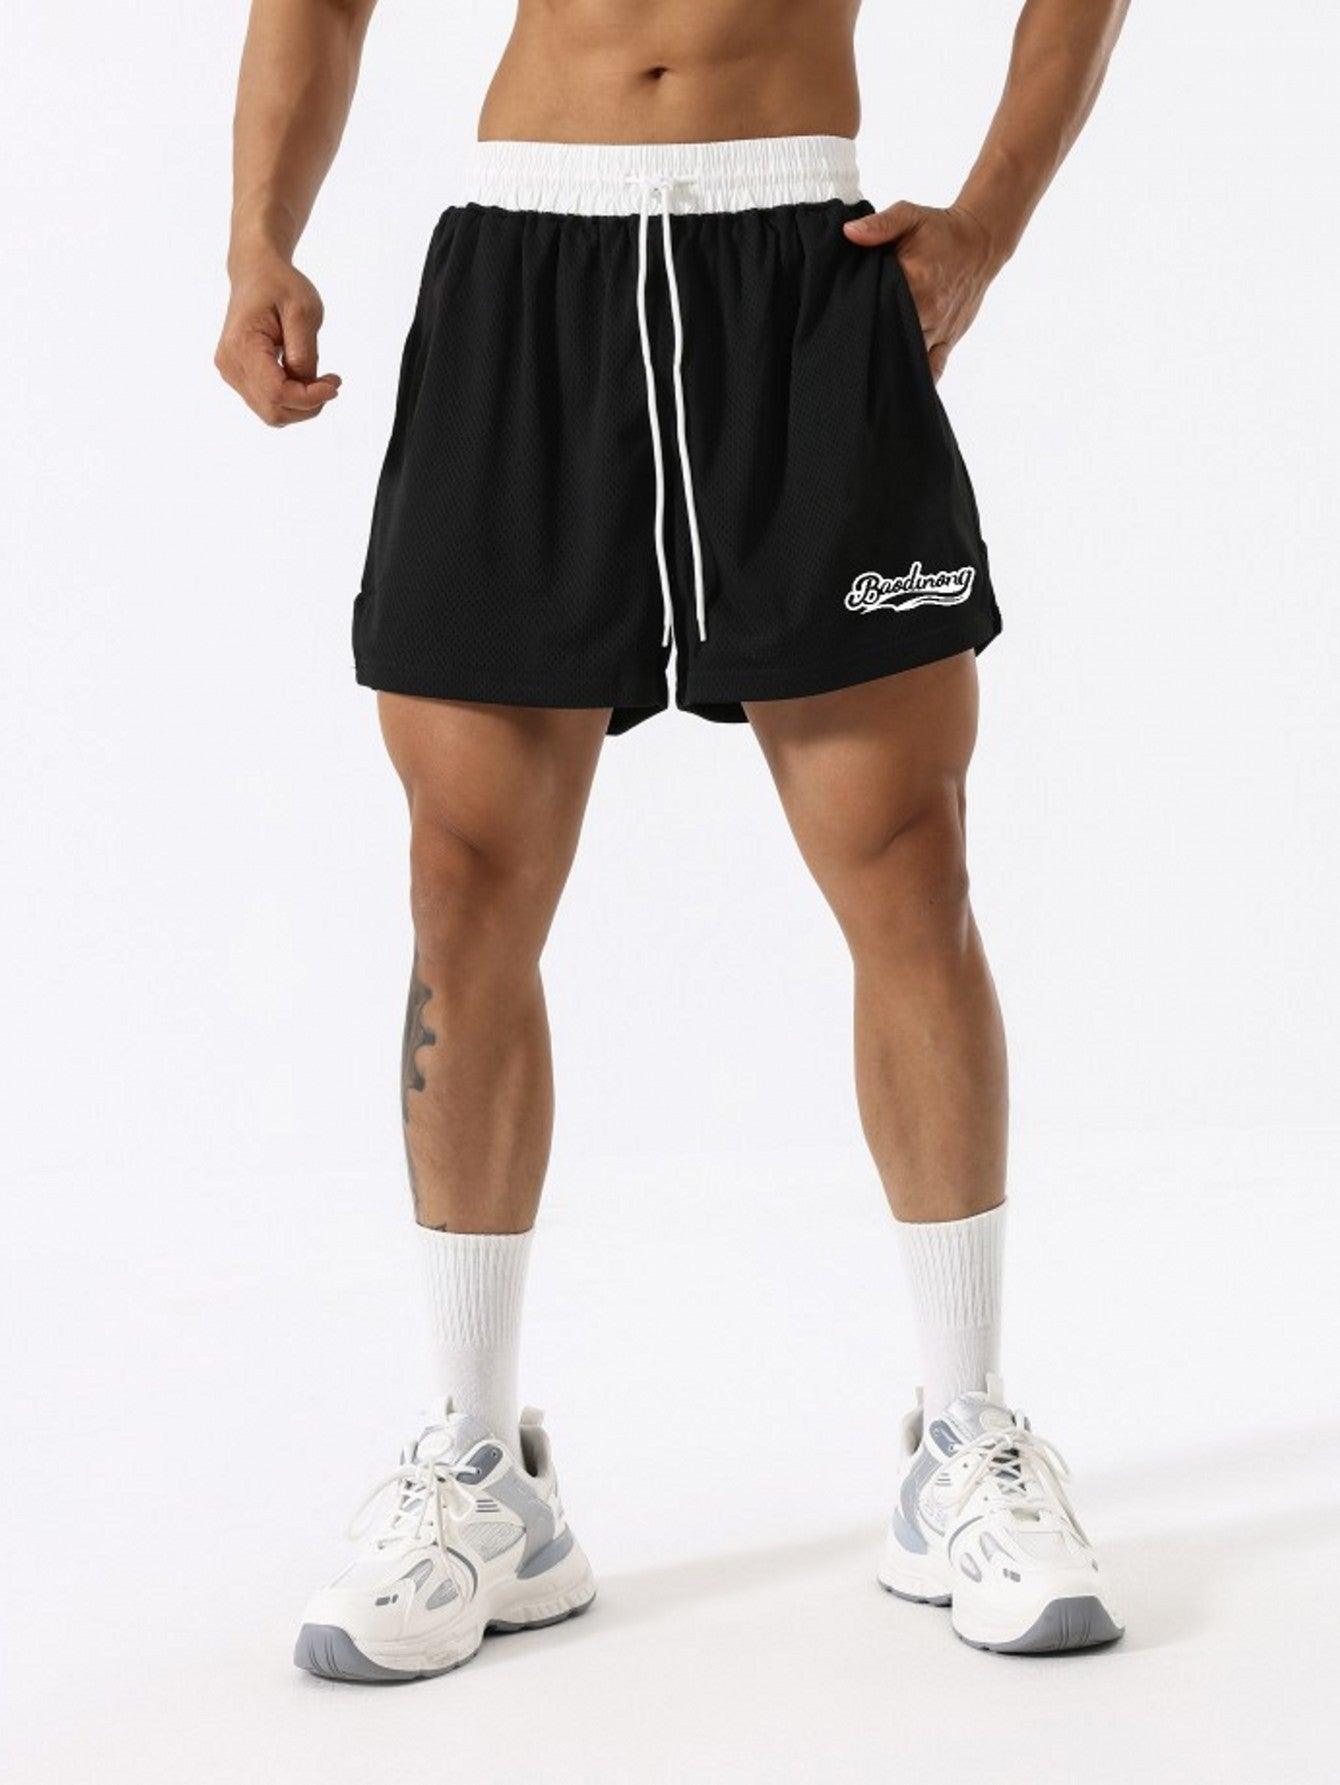 New Men's Breathable Quick-dry Basketball Sports Pirate Shorts - Nioor